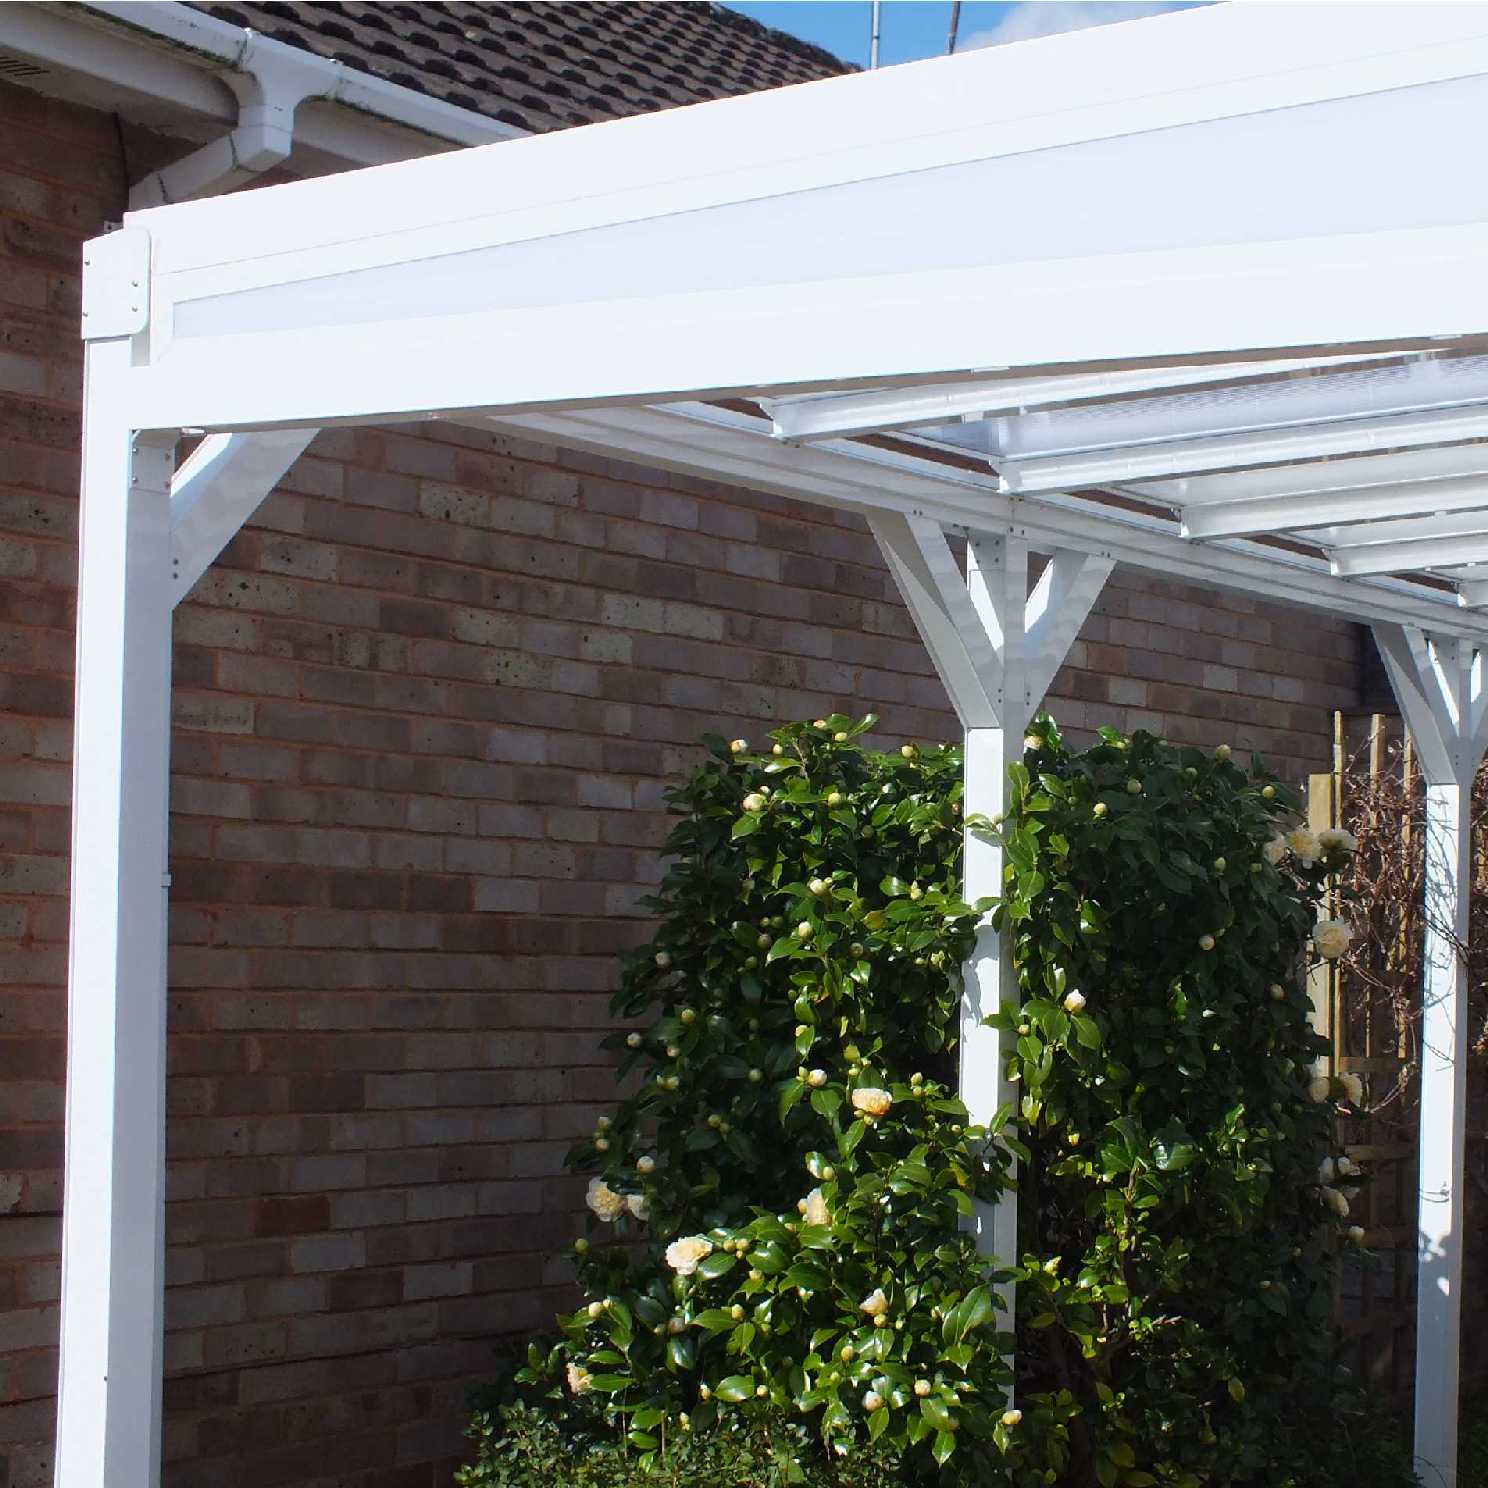 Omega Smart Lean-To Canopy, White with 16mm Polycarbonate Glazing - 7.8m (W) x 3.5m (P), (4) Supporting Posts from Omega Build